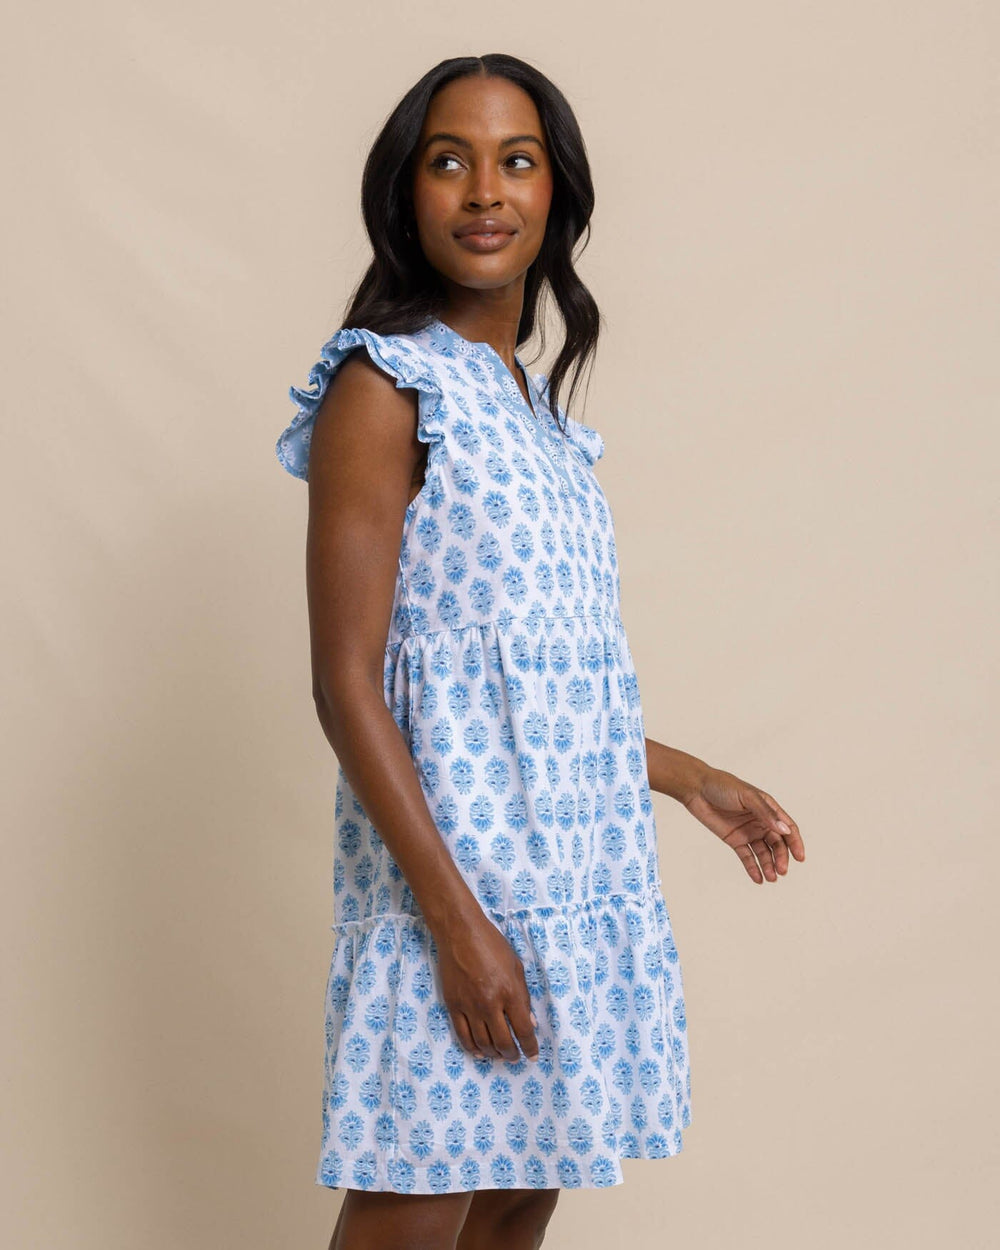 The front view of the Southern Tide Eloise Garden Variety Printed Dress by Southern Tide - Classic White